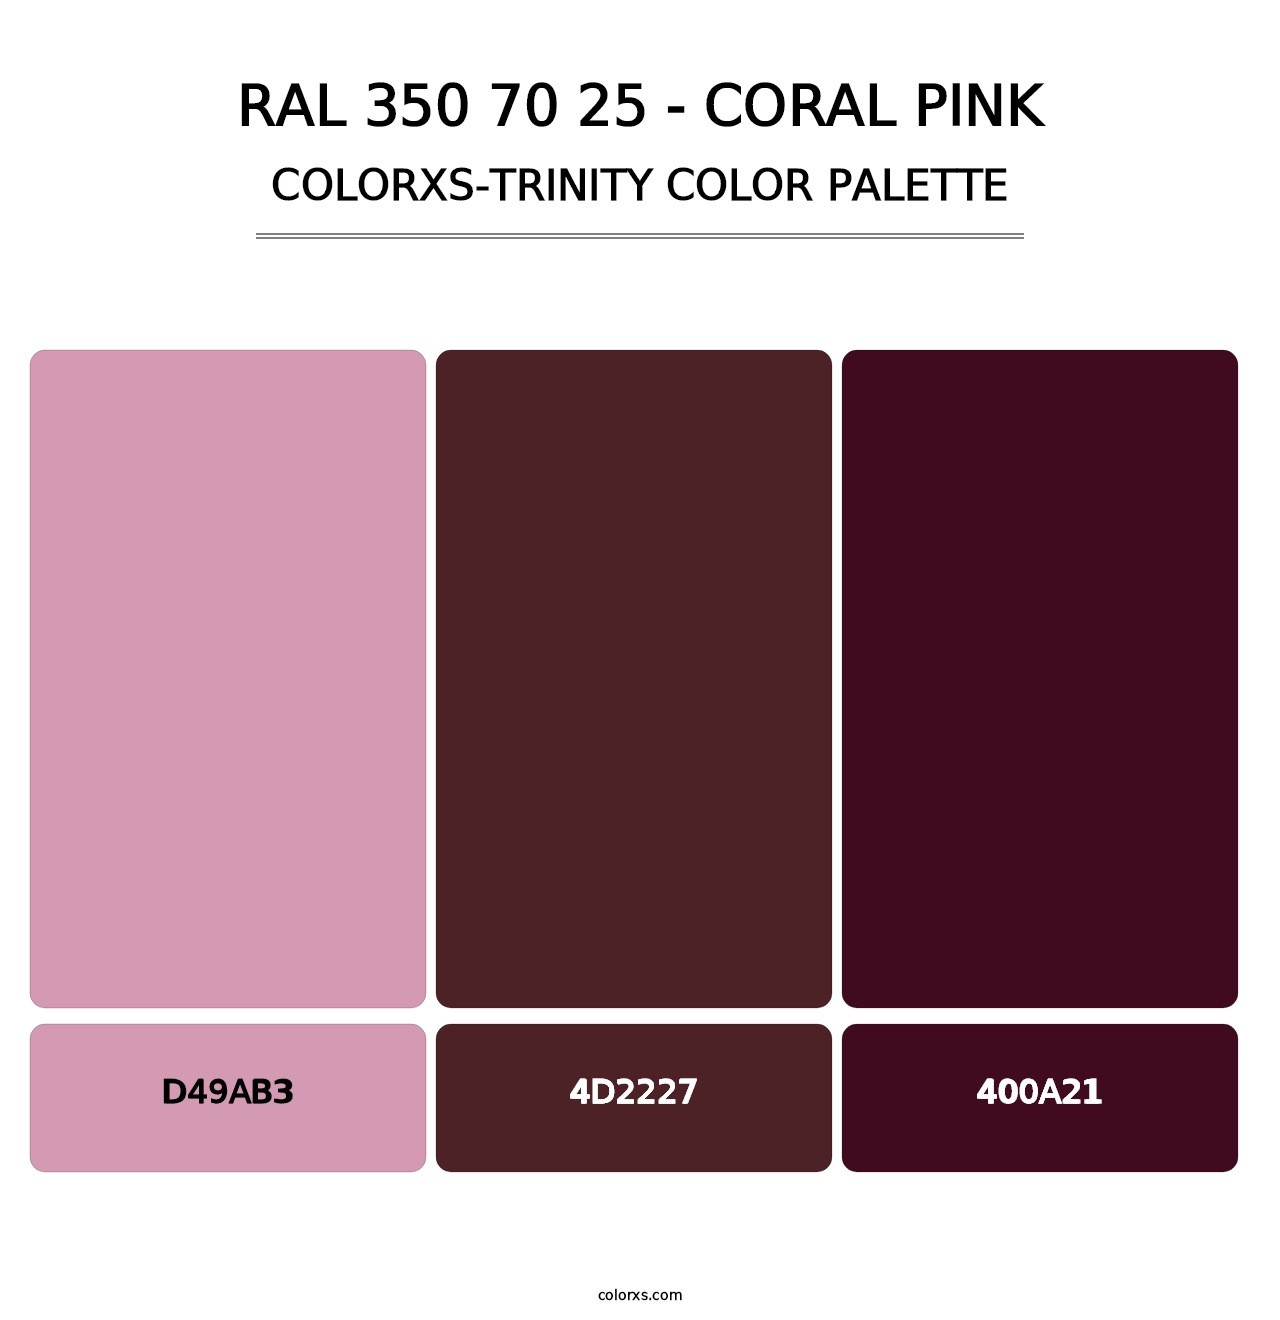 RAL 350 70 25 - Coral Pink - Colorxs Trinity Palette